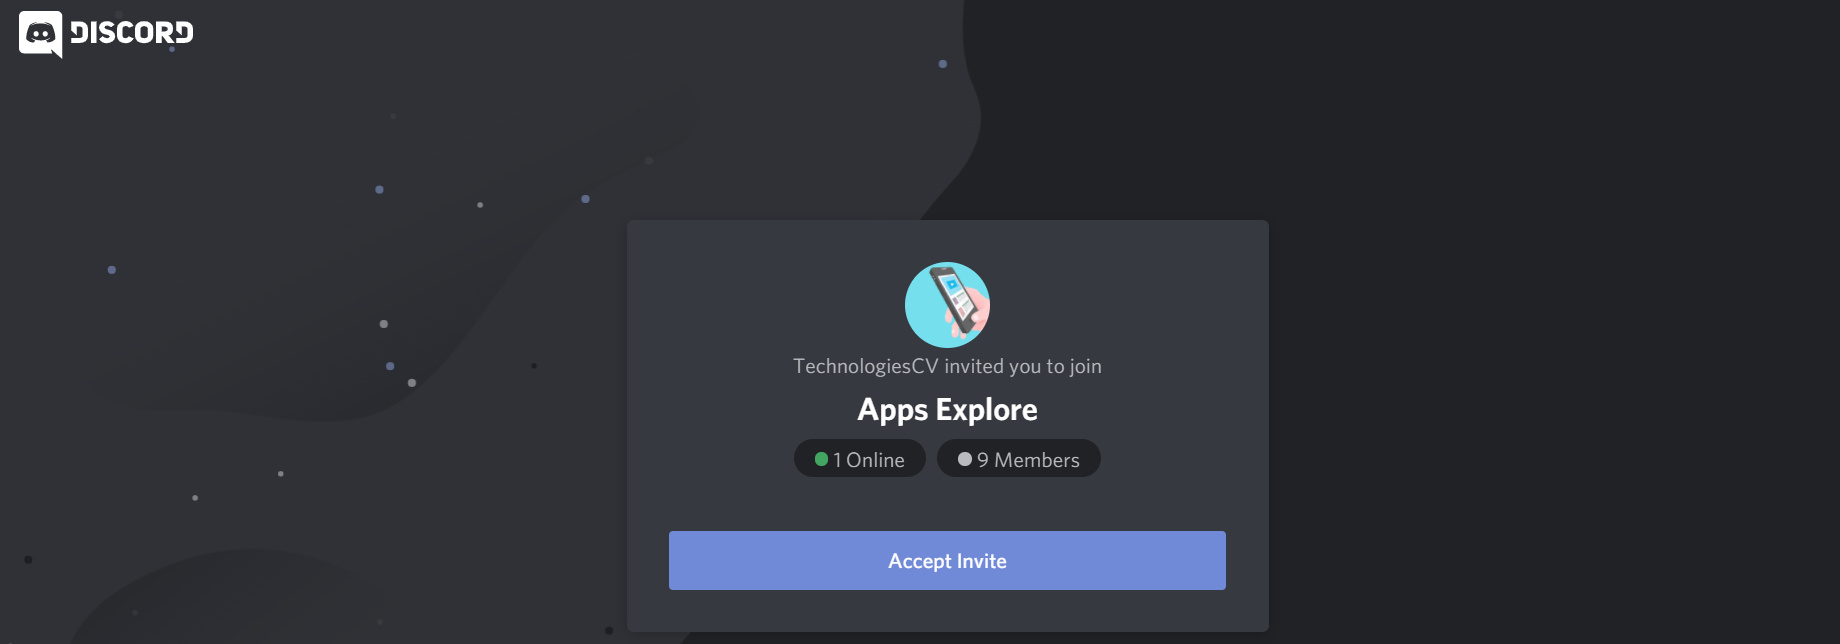 Discord for developers - General Discussion - MIT App Inventor Community